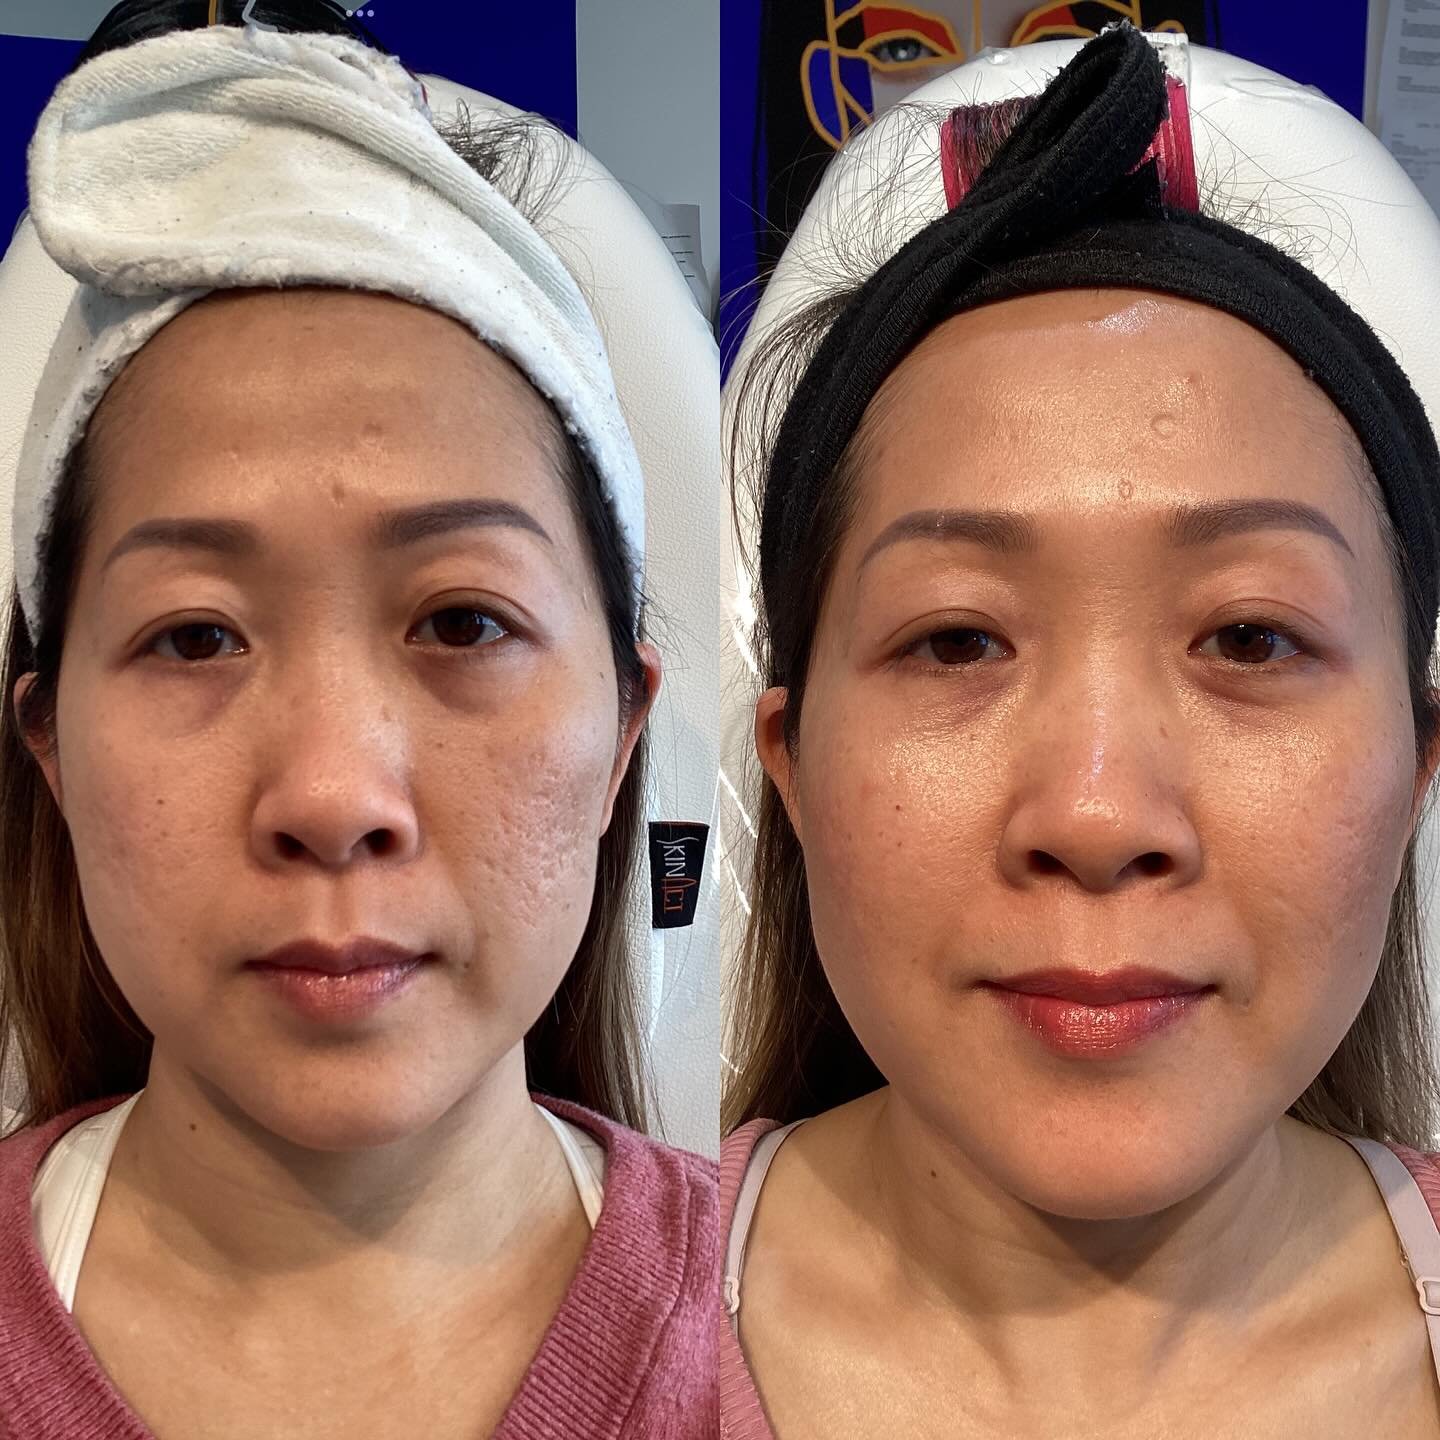 Results after 4 sessions of Radio Frequency Microneedling and 1540 

Improve:
Skin Tone 
Skin Texture 
Fine lines &amp; Wrinkles 
Acne Scarring 
Surgical Scarring 
Sun Damage 
Stretch Marks 

The combination of therapies encourages skin to regrow, re